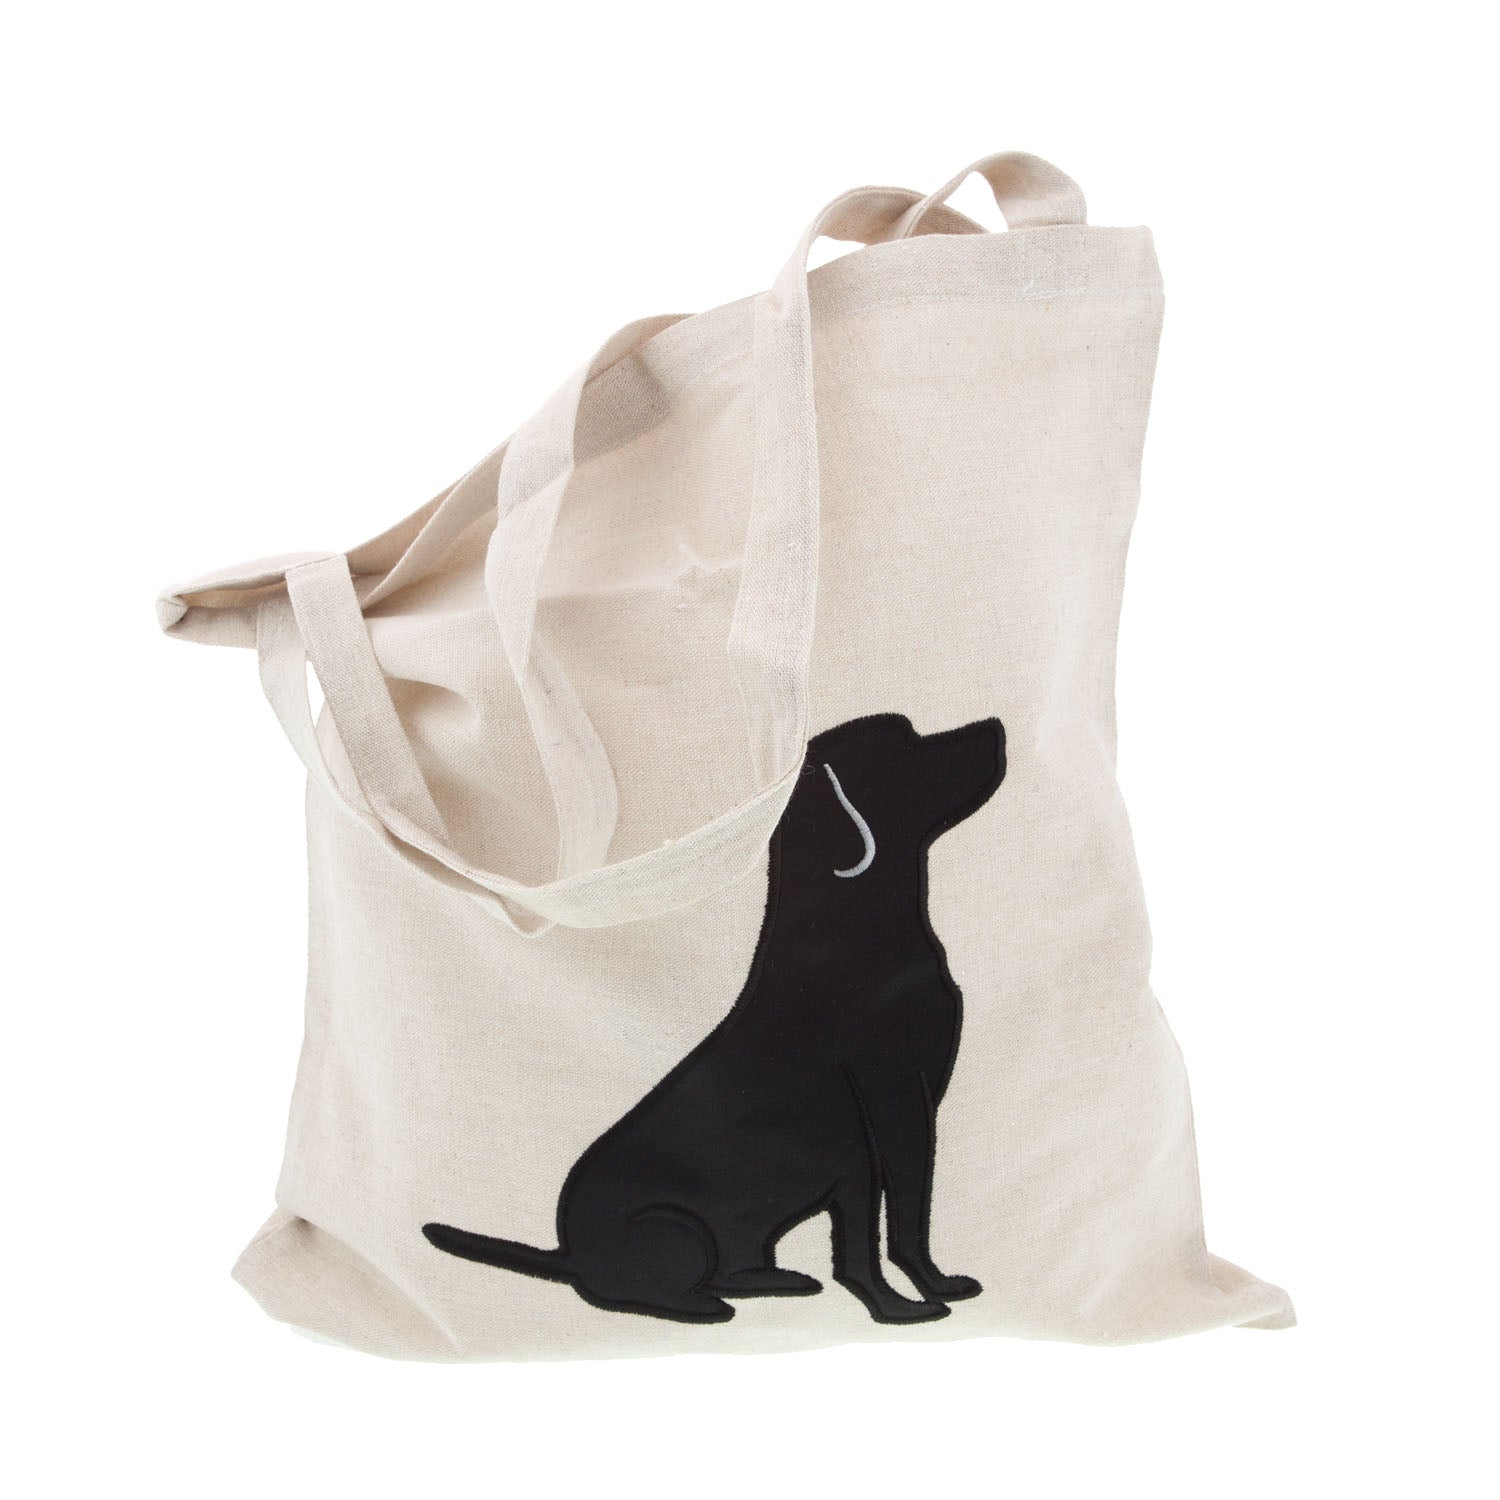 Dog Lover Gifts available at Dog Krazy Gifts - Black Labrador motif on cream Tote Bag, part of the Black Dog range available from Dog Krazy Gifts